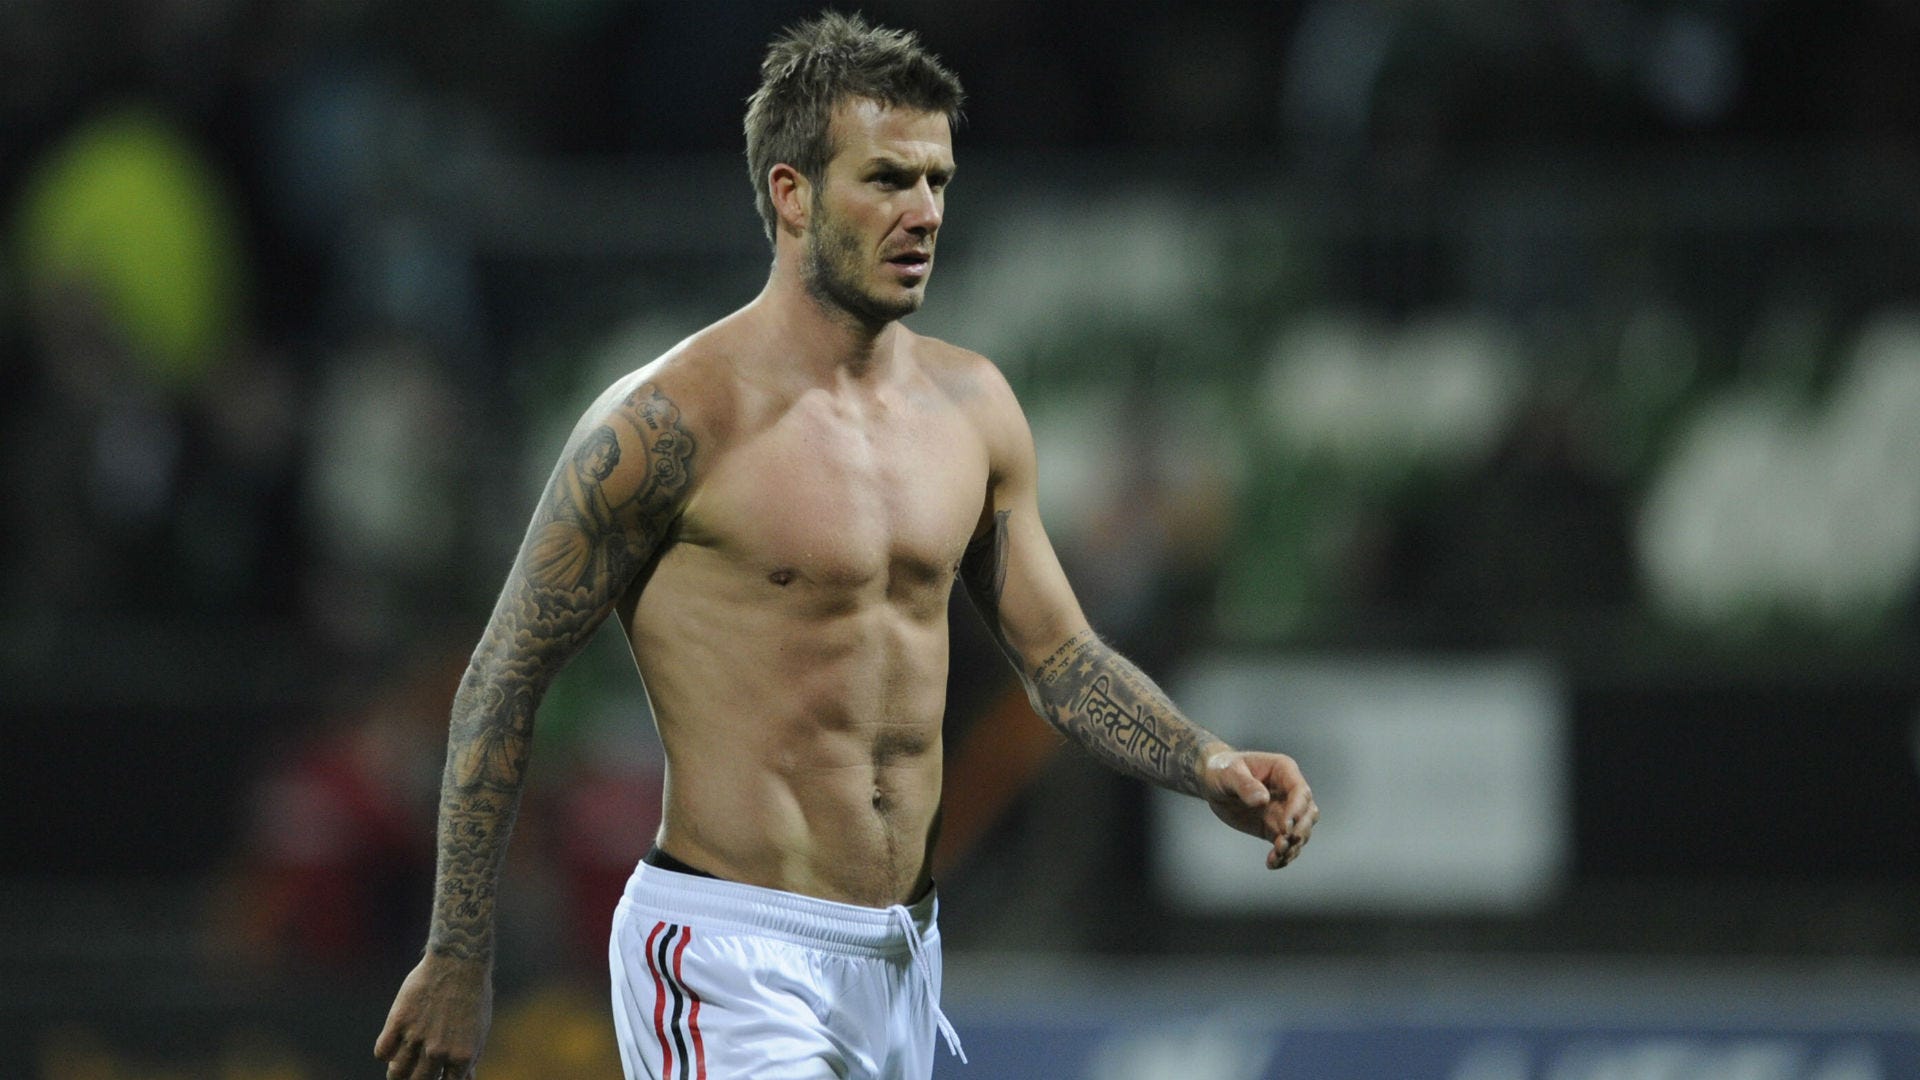 David Beckham's tattoos: Where are they and what do they mean?